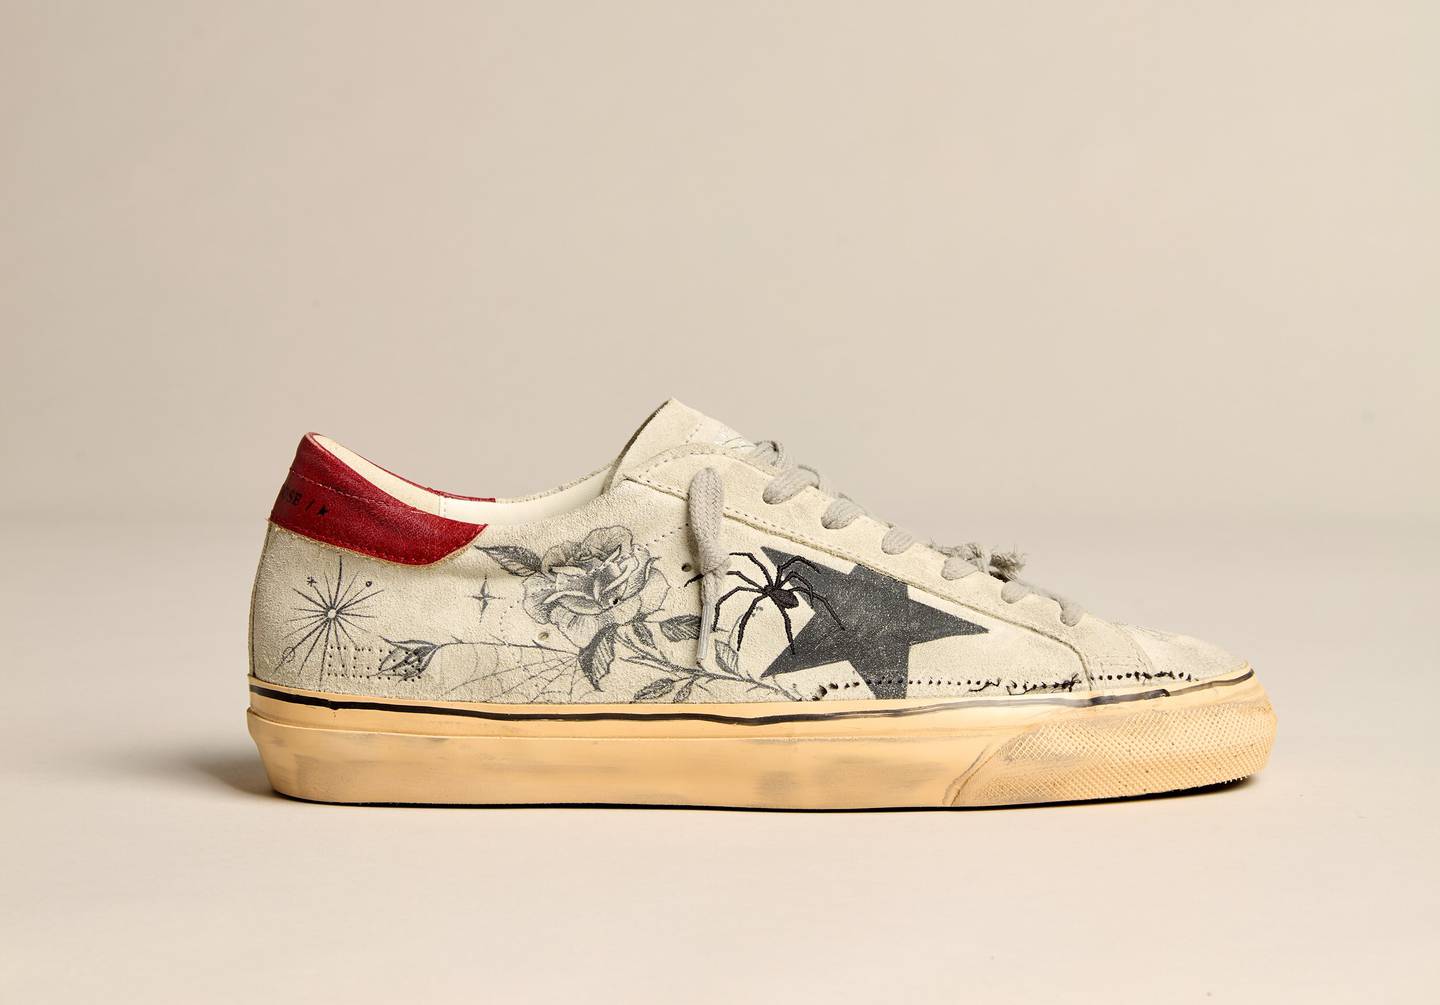 A special-edition Golden Goose sneaker designed by tattoo artist Dr. Woo.